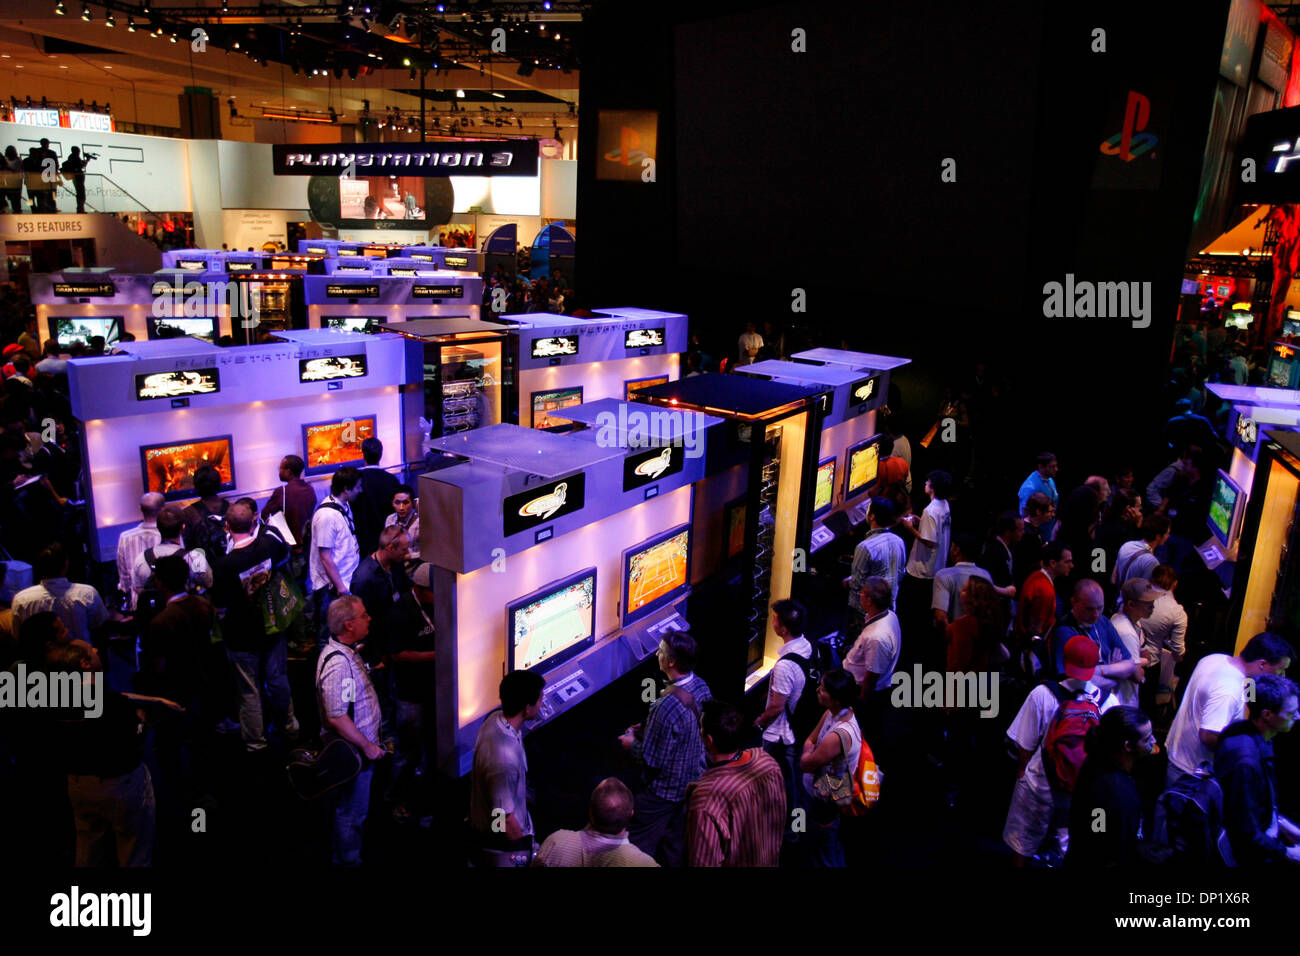 May 11, 2006; Los Angeles, CA, USA; Sony featured its new Playstation 3 at the recent trade-only E3 video game expo in Los Angeles. Mandatory Credit: Photo by Mike Fox/ZUMA Press. (©) Copyright 2006 by Mike Fox Stock Photo